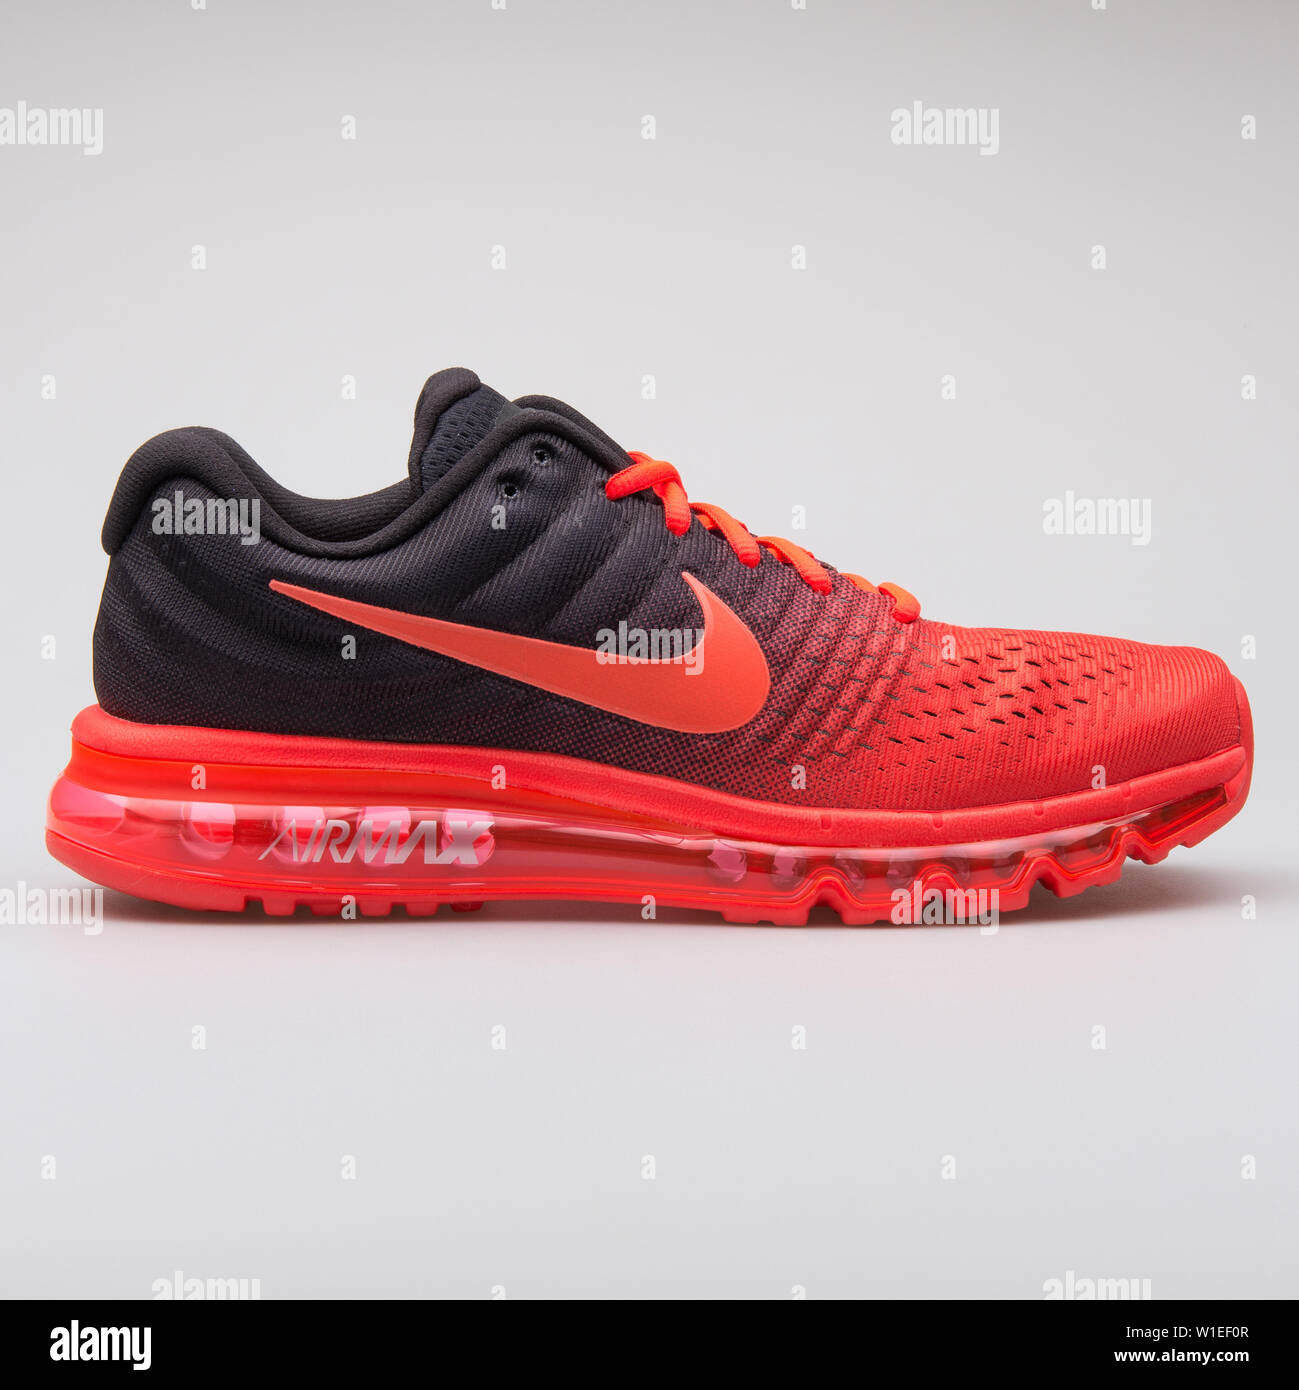 nike air max 2017 red and white cheap nike shoes online